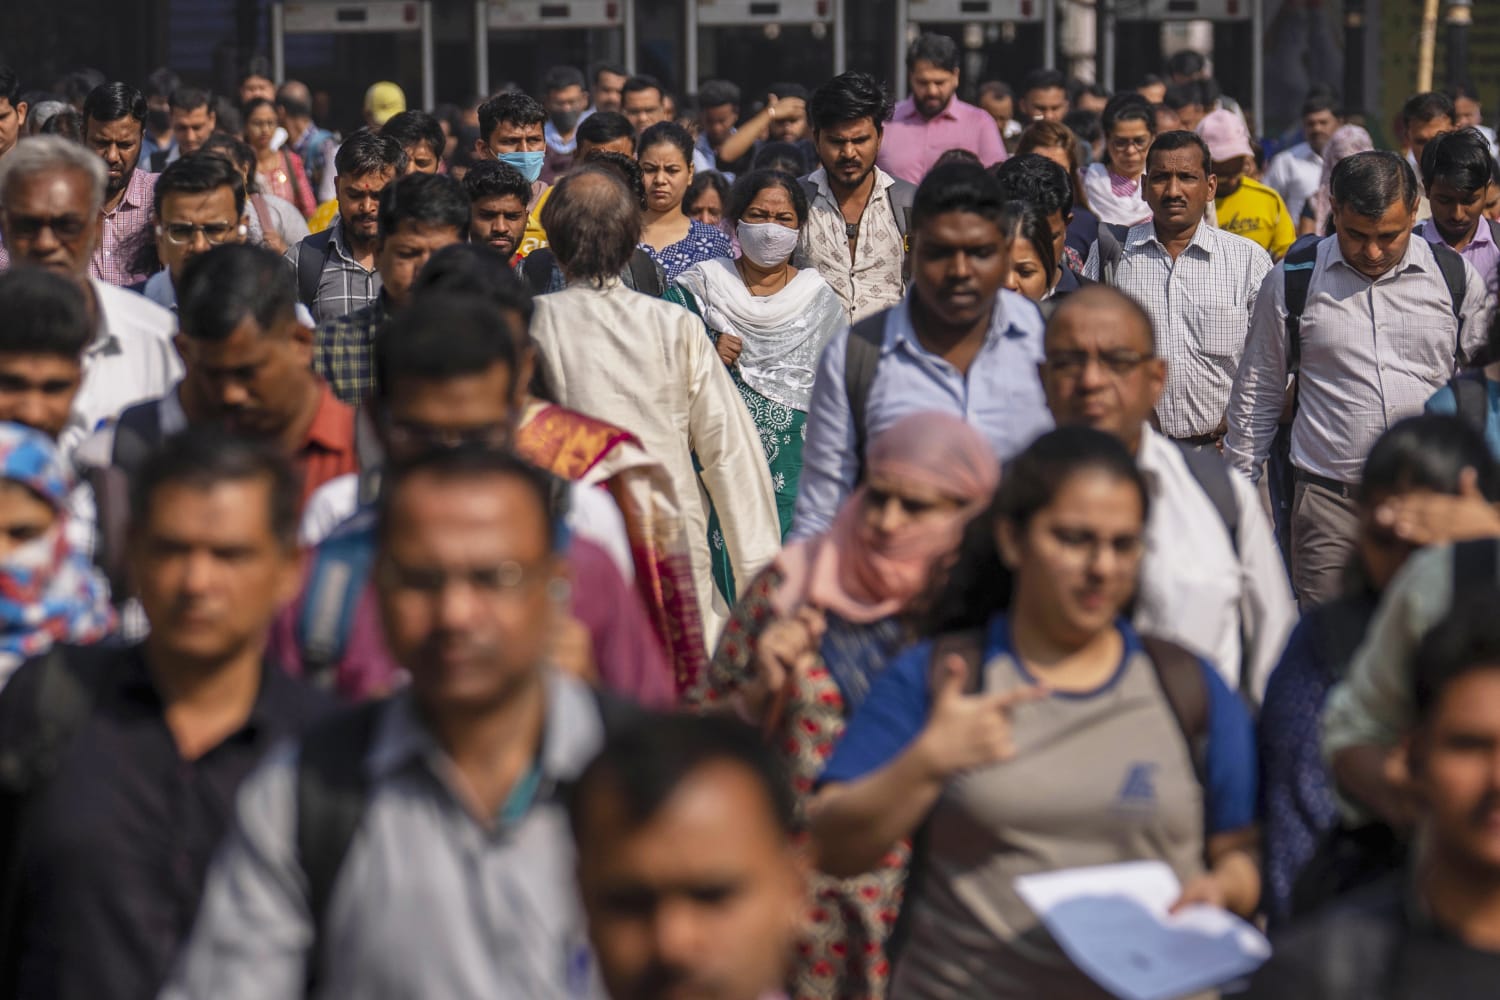 India to overtake China as the world’s most populous country by mid-2023, U.N. says